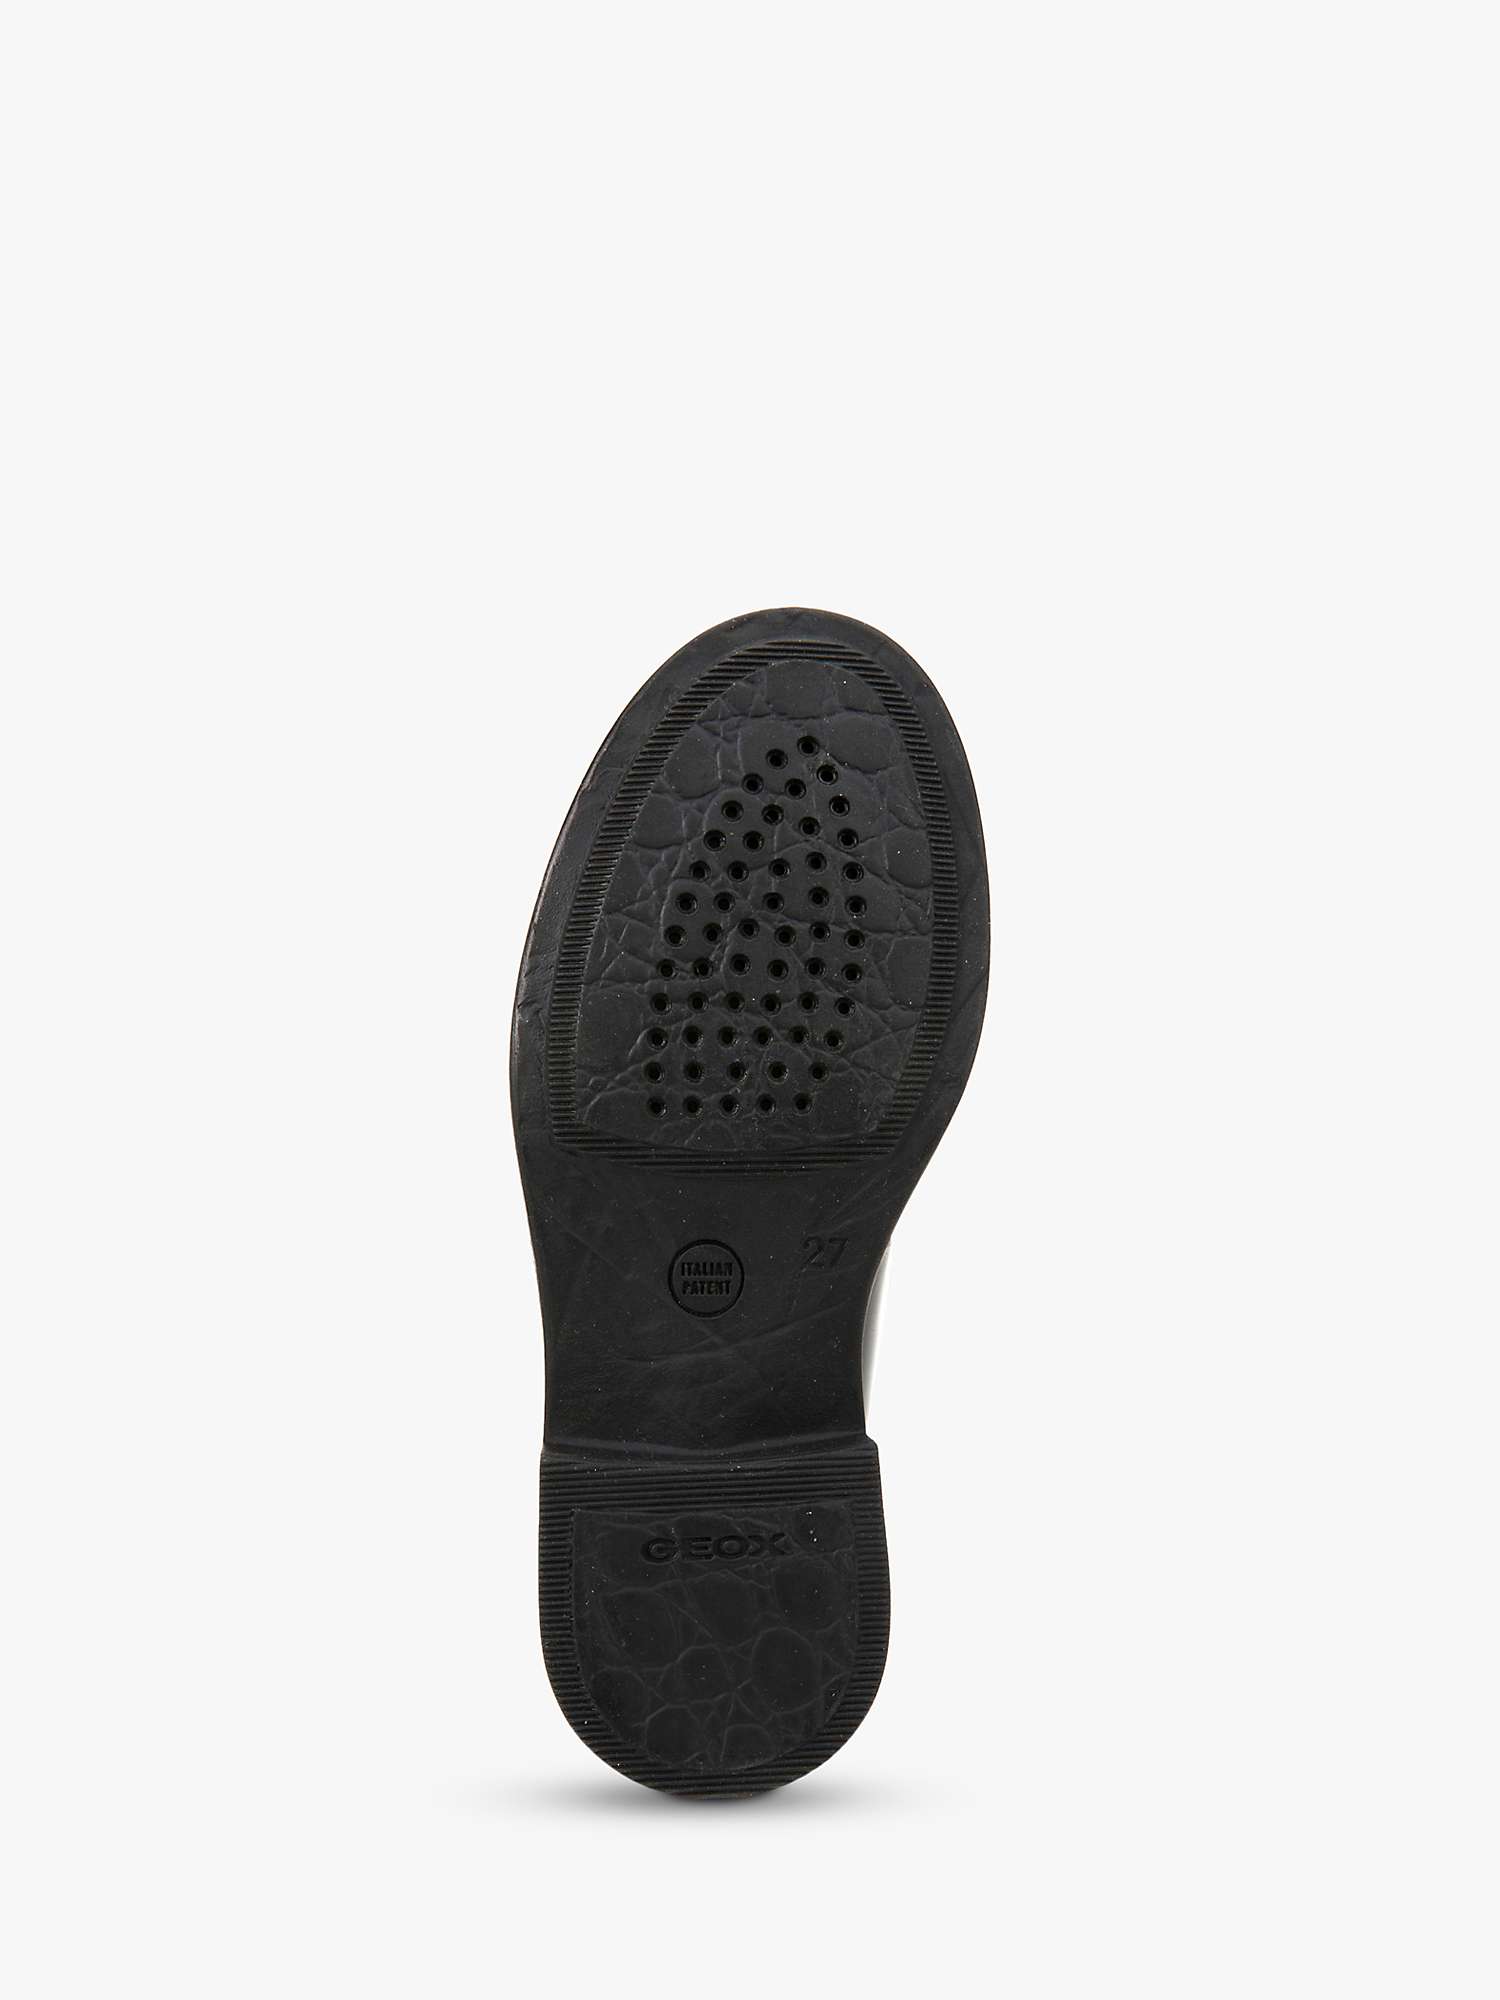 Buy Geox Kids' Agata Slip On Leather Loafers Online at johnlewis.com